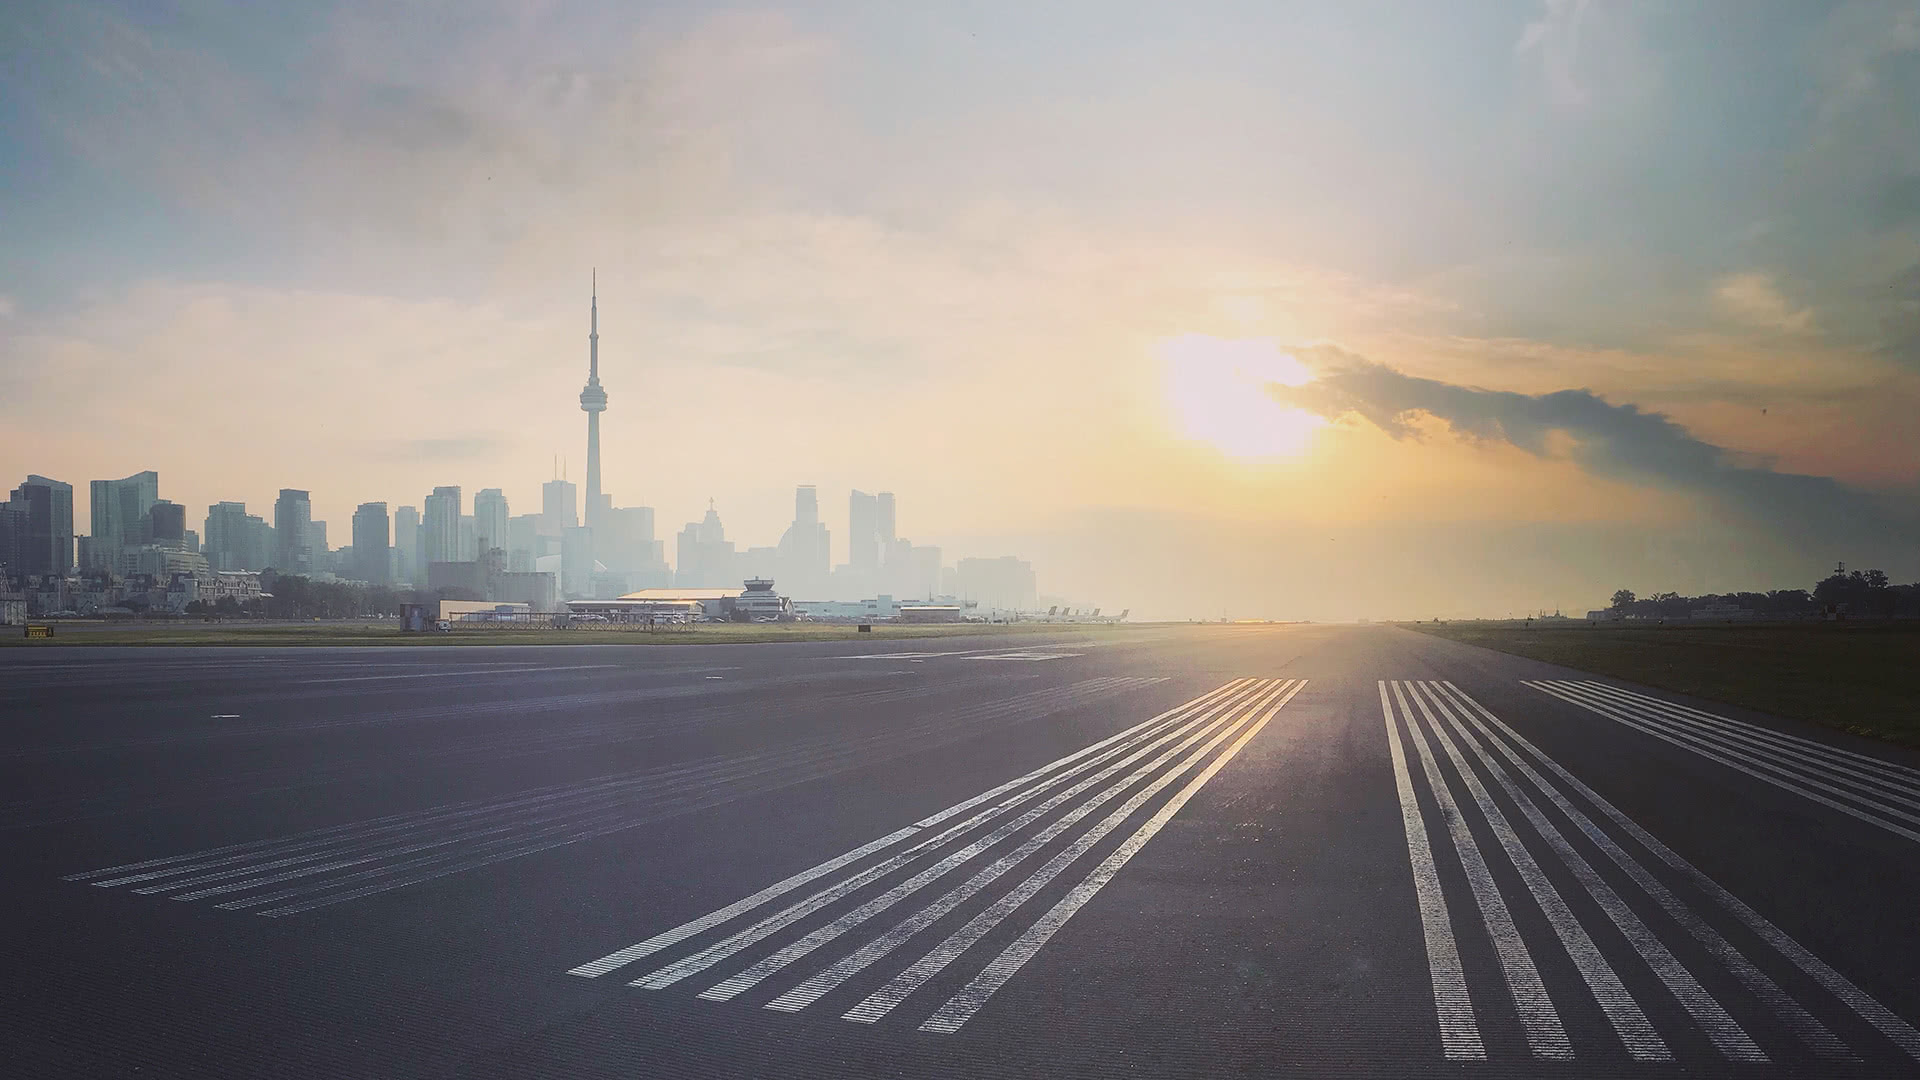 Toronto city skyline at sunrise with the airport runway in foreground